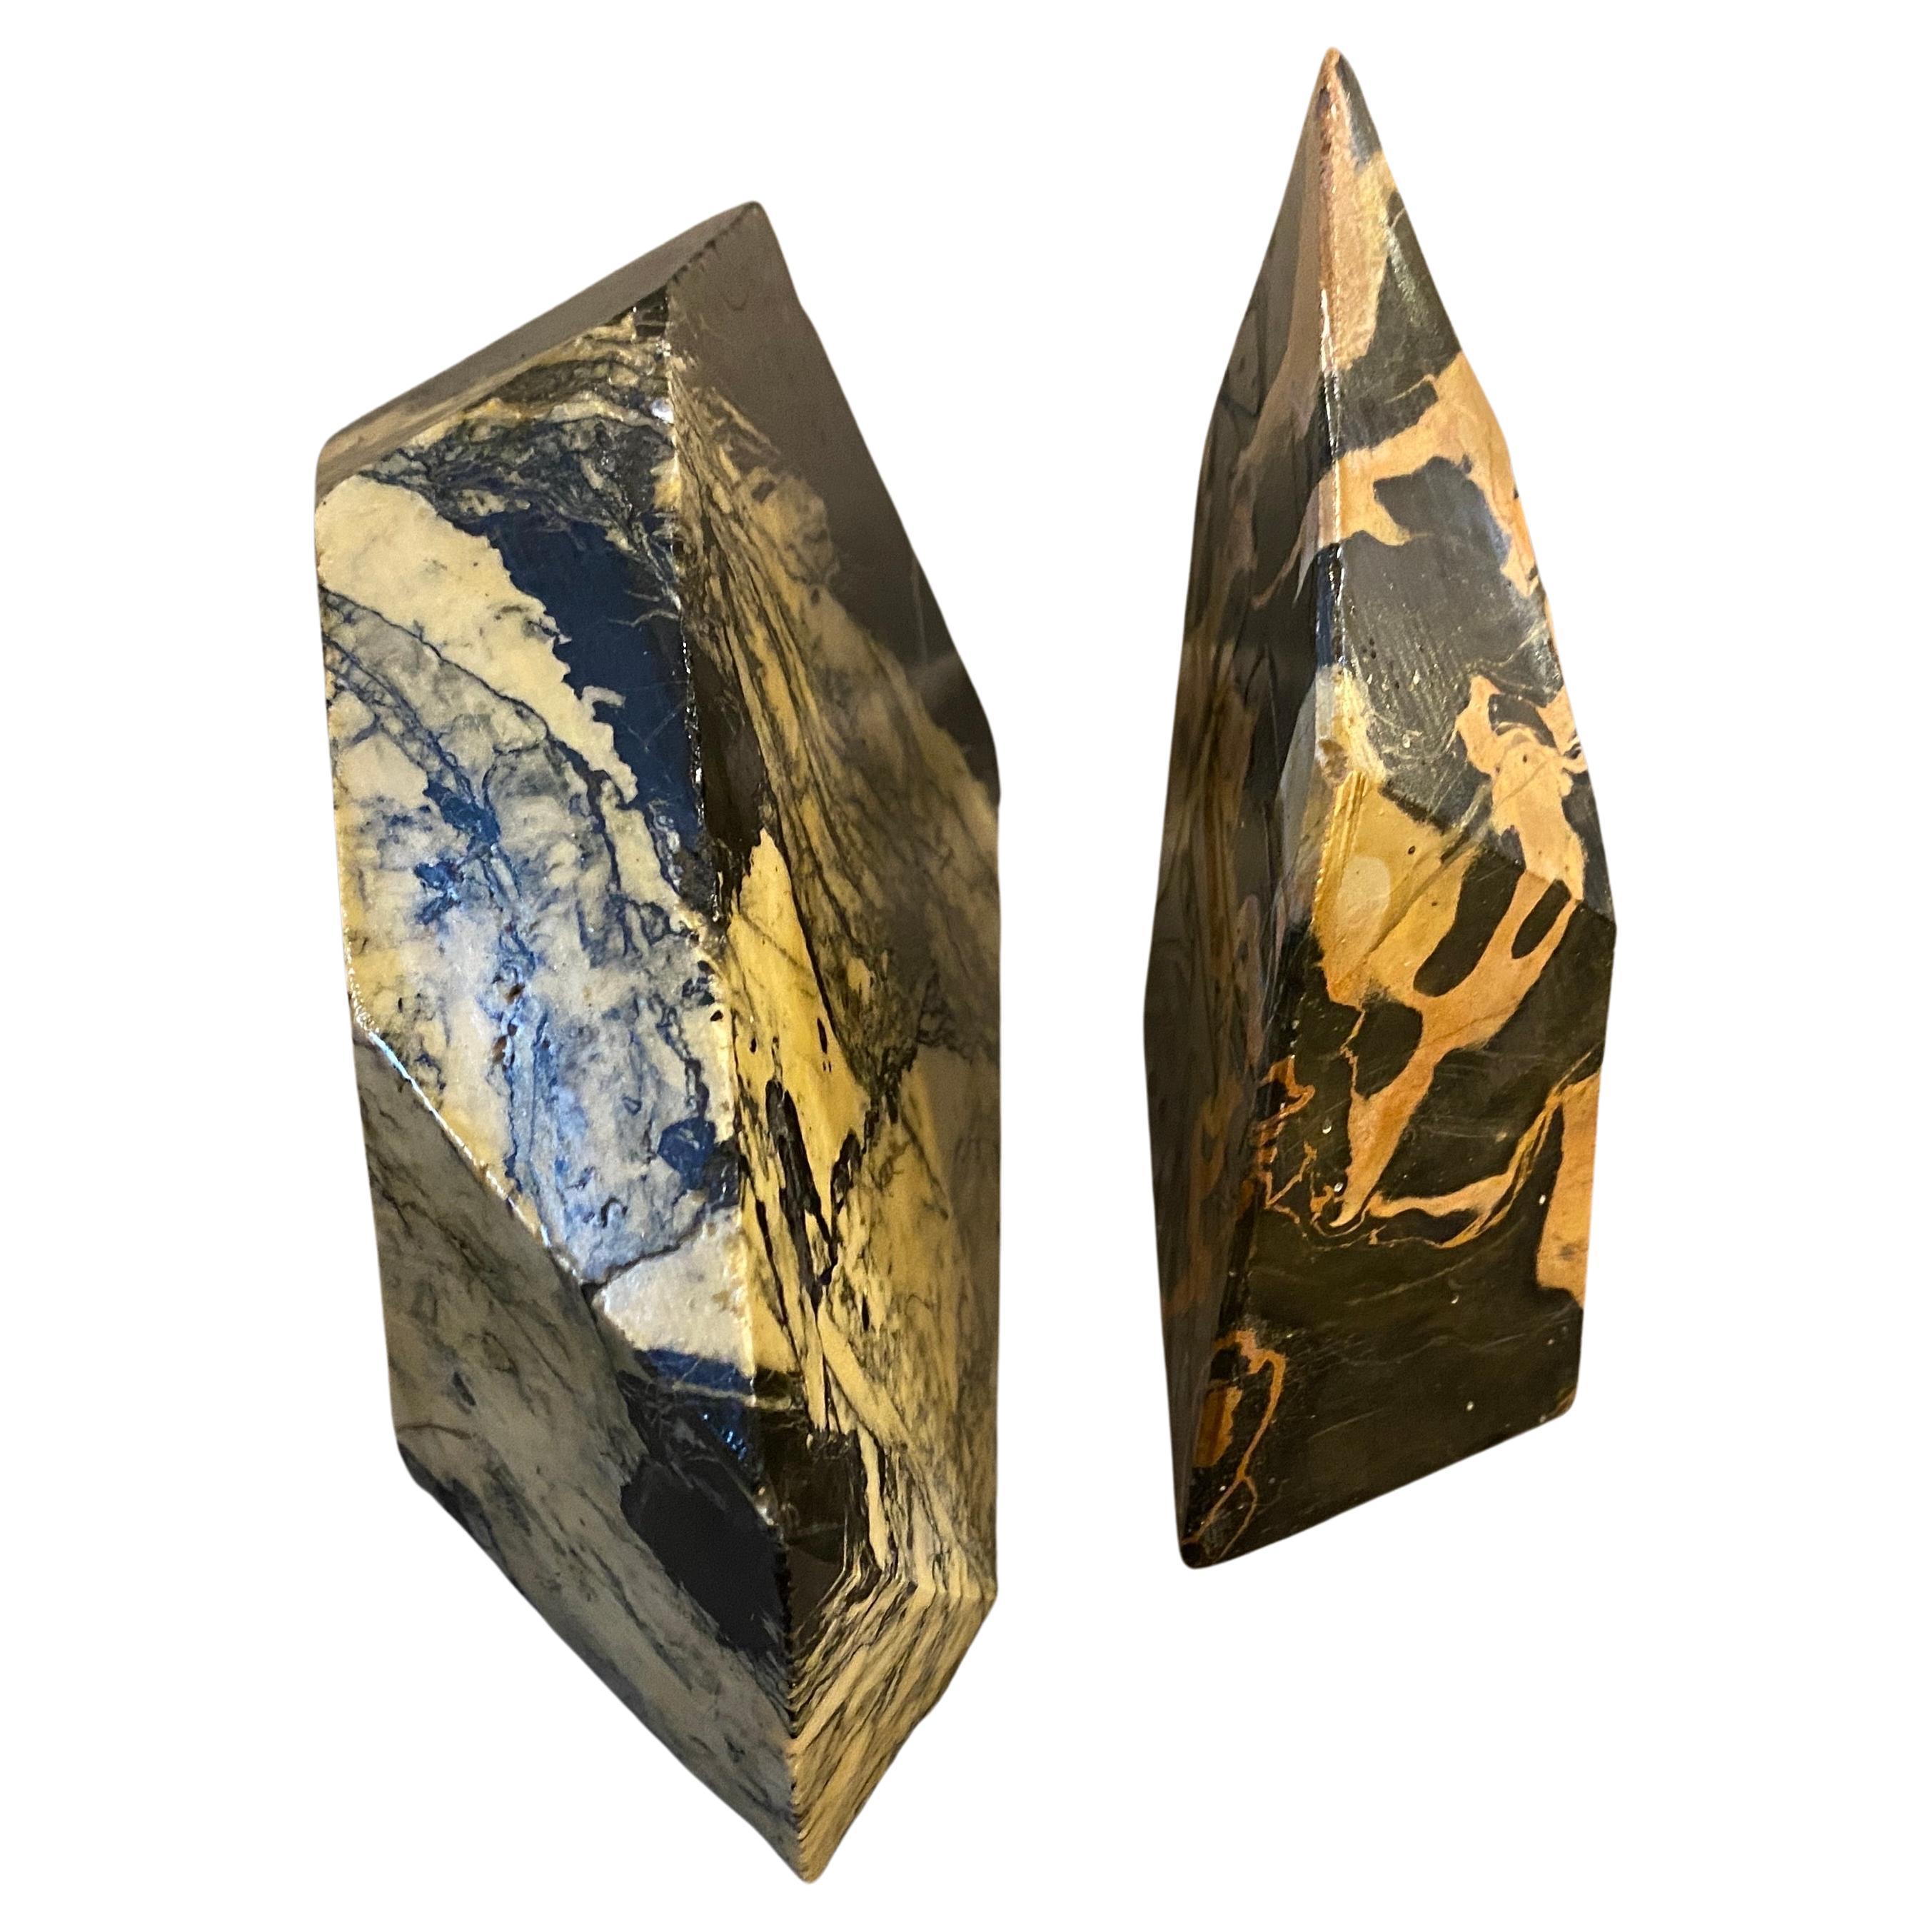 A pair of asymmetrical marble bookends manufactured in Italy in the Forties. The Portoro marble, or Portovenere marble, is a fine variety of Italian marble from the suggestive Gulf of Poets, in the Ligurian province of La Spezia, and is one of the